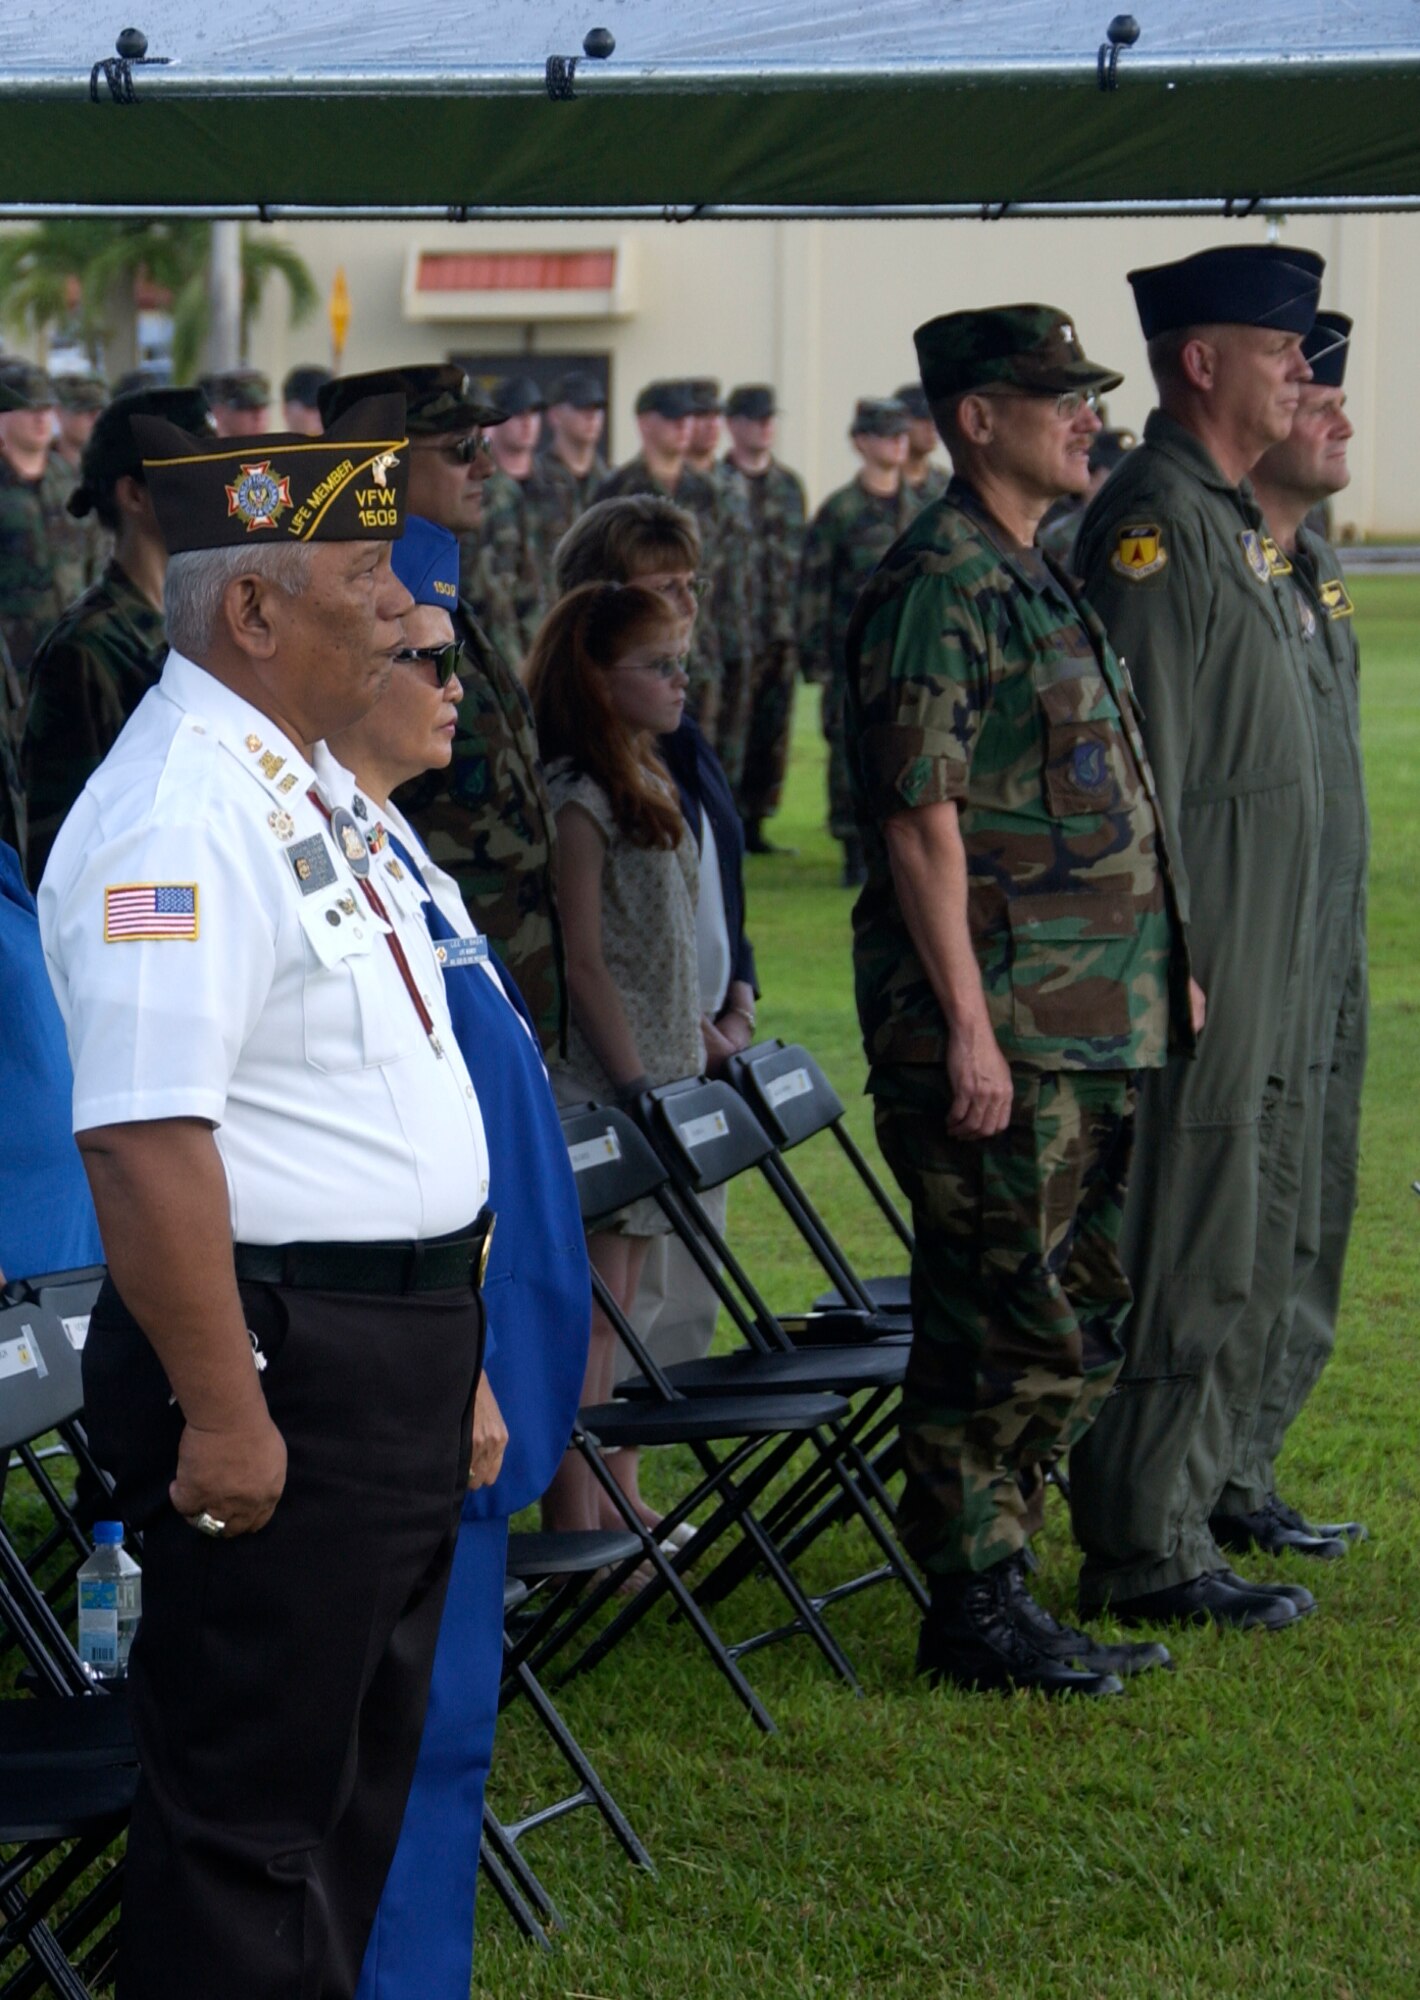 Former Commander of Veteran's of Foreign Wars post 1509 attend Andersen's POW/MIA retreat ceremony. Andersen honors the fallen Prisoners Of War and those still "Missing In Action" with their annual remembrance ceremony. (U.S. Air Force photo/Tech. Sgt. Michael Boquette)